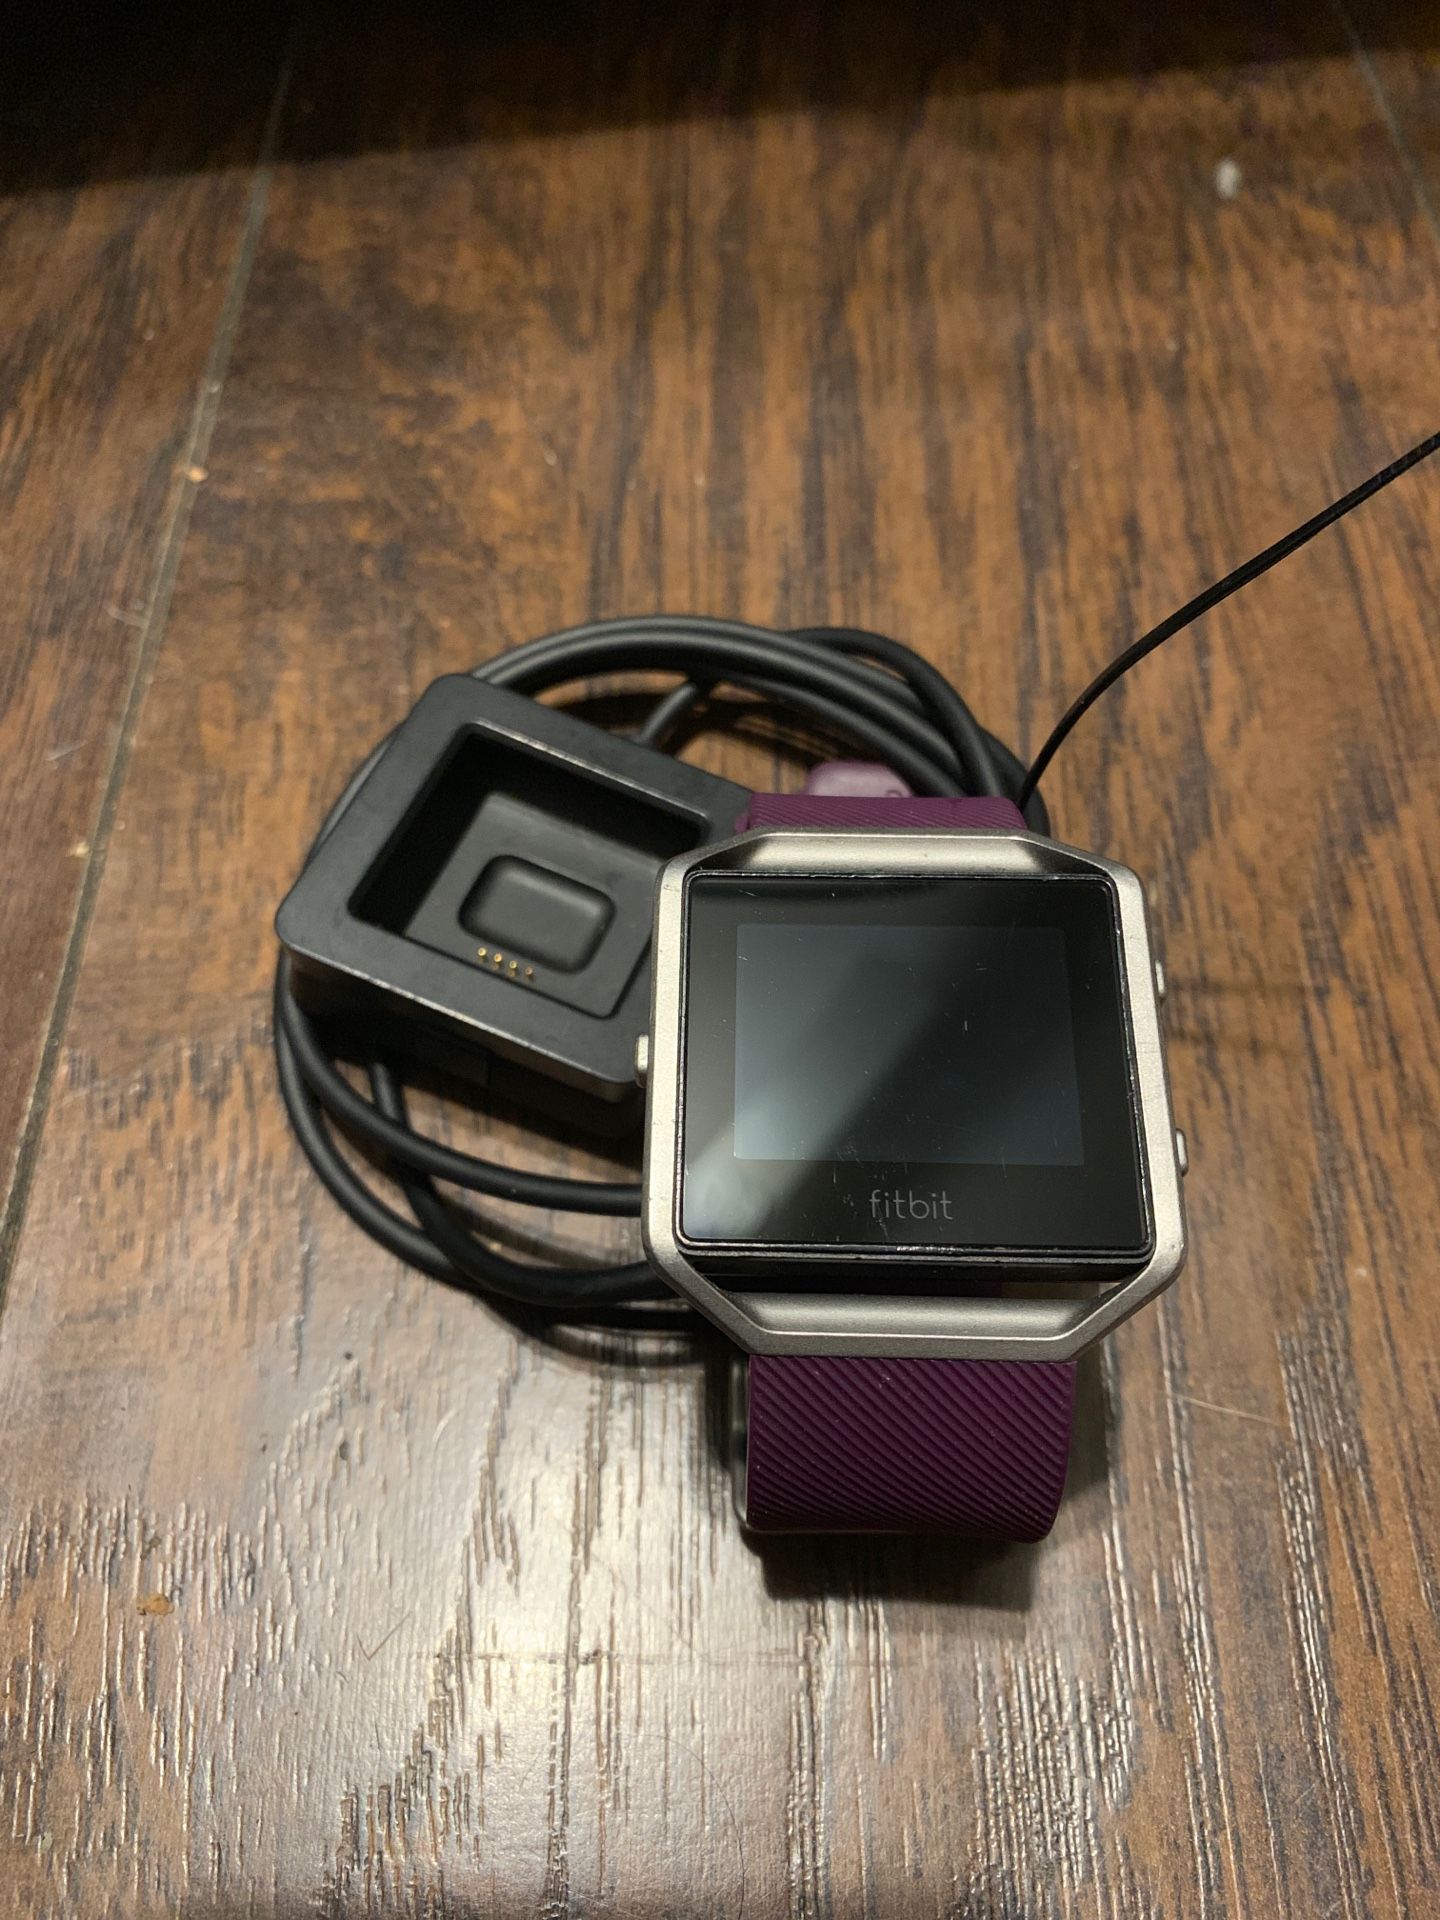 Fitbit blaze w/ charger and band